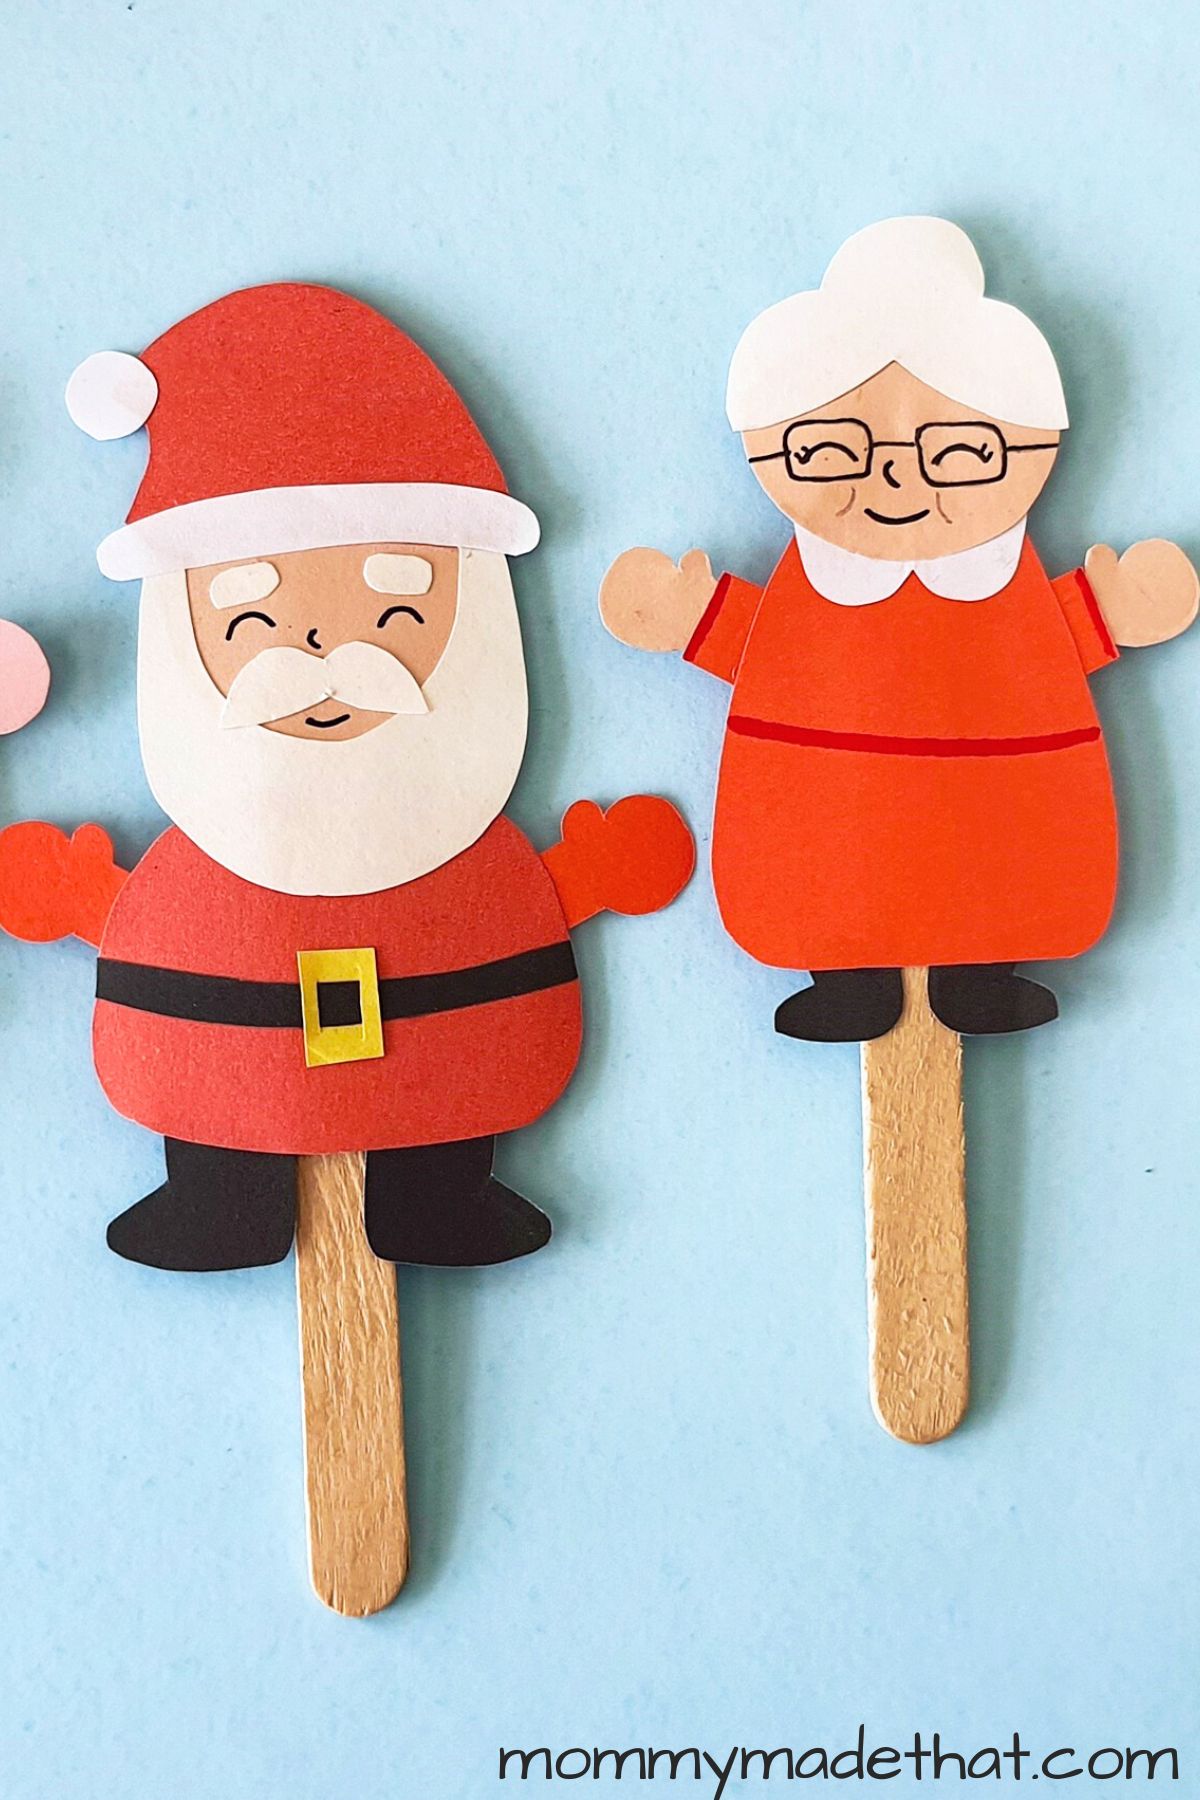 Cute Santa and Mrs. Claus Puppets